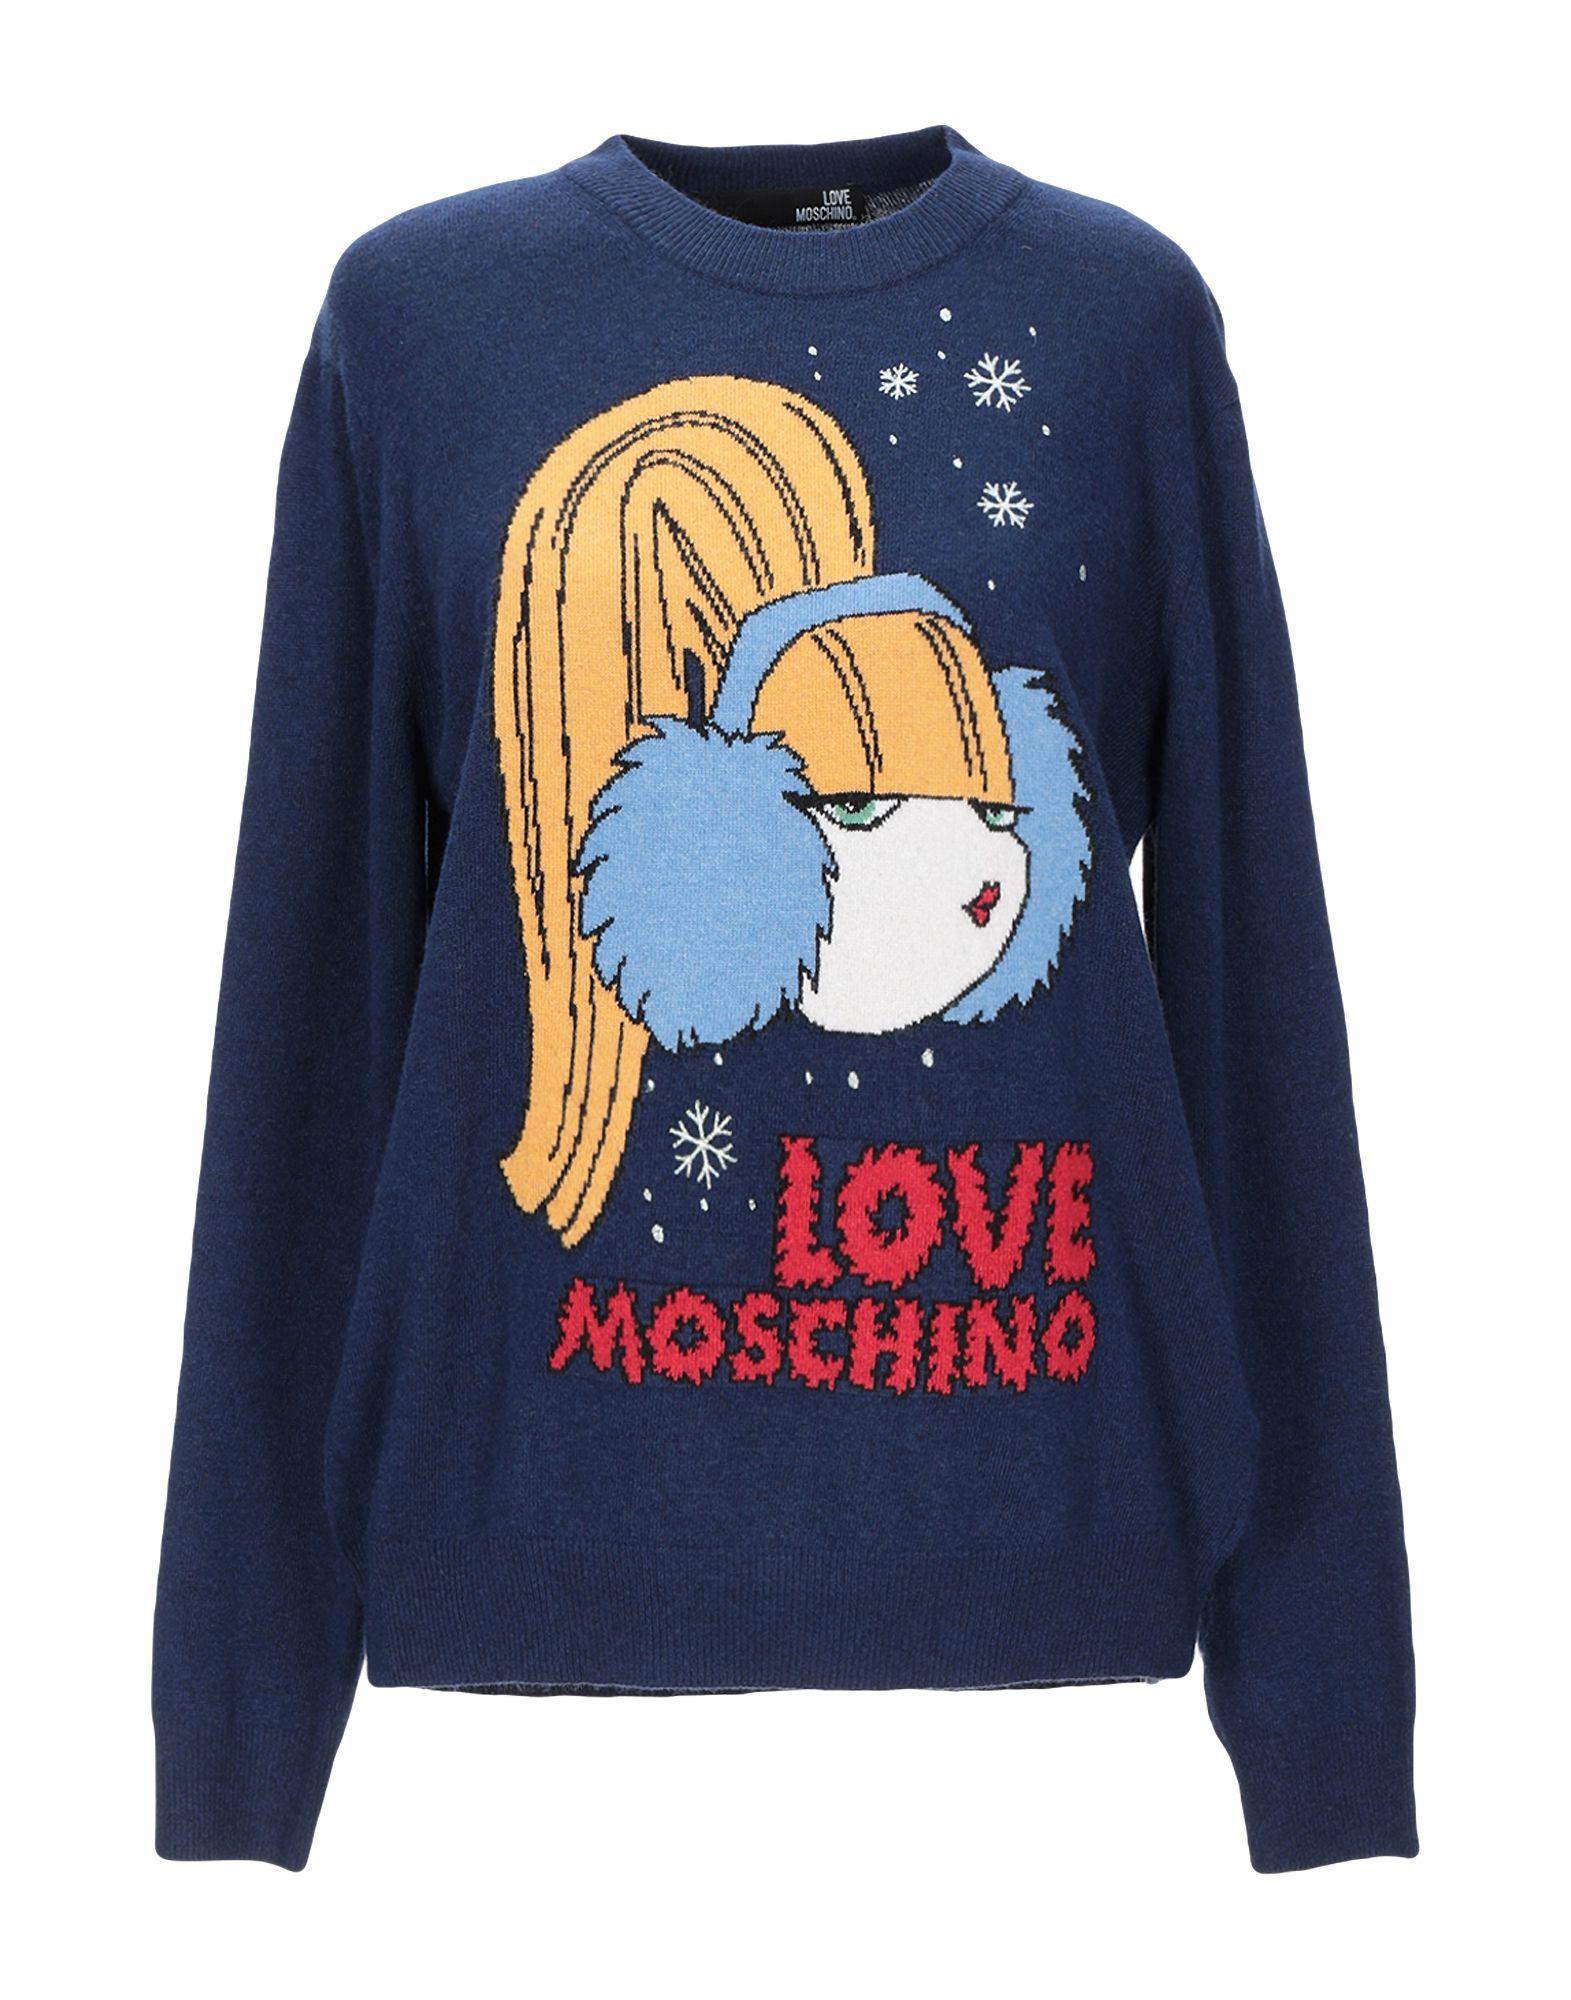 Love Moschino Synthetic Jumper in Dark Blue (Blue) - Lyst